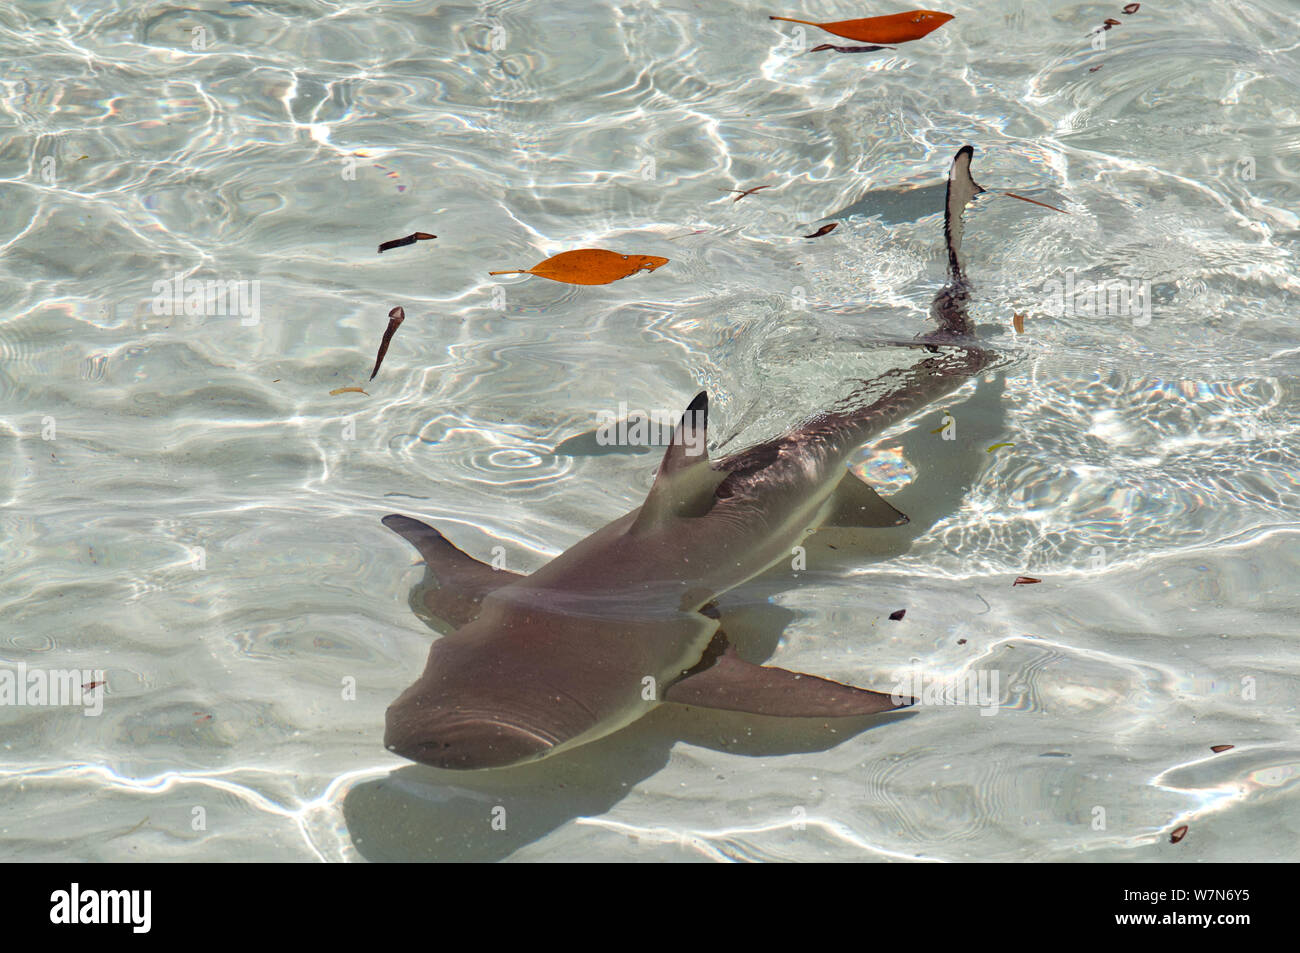 Blacktip reef shark (Carcharhinus melanopterus) swimming in shallow crystal clear water, Aldabra Atoll, Seychelles, Indian Ocean Stock Photo